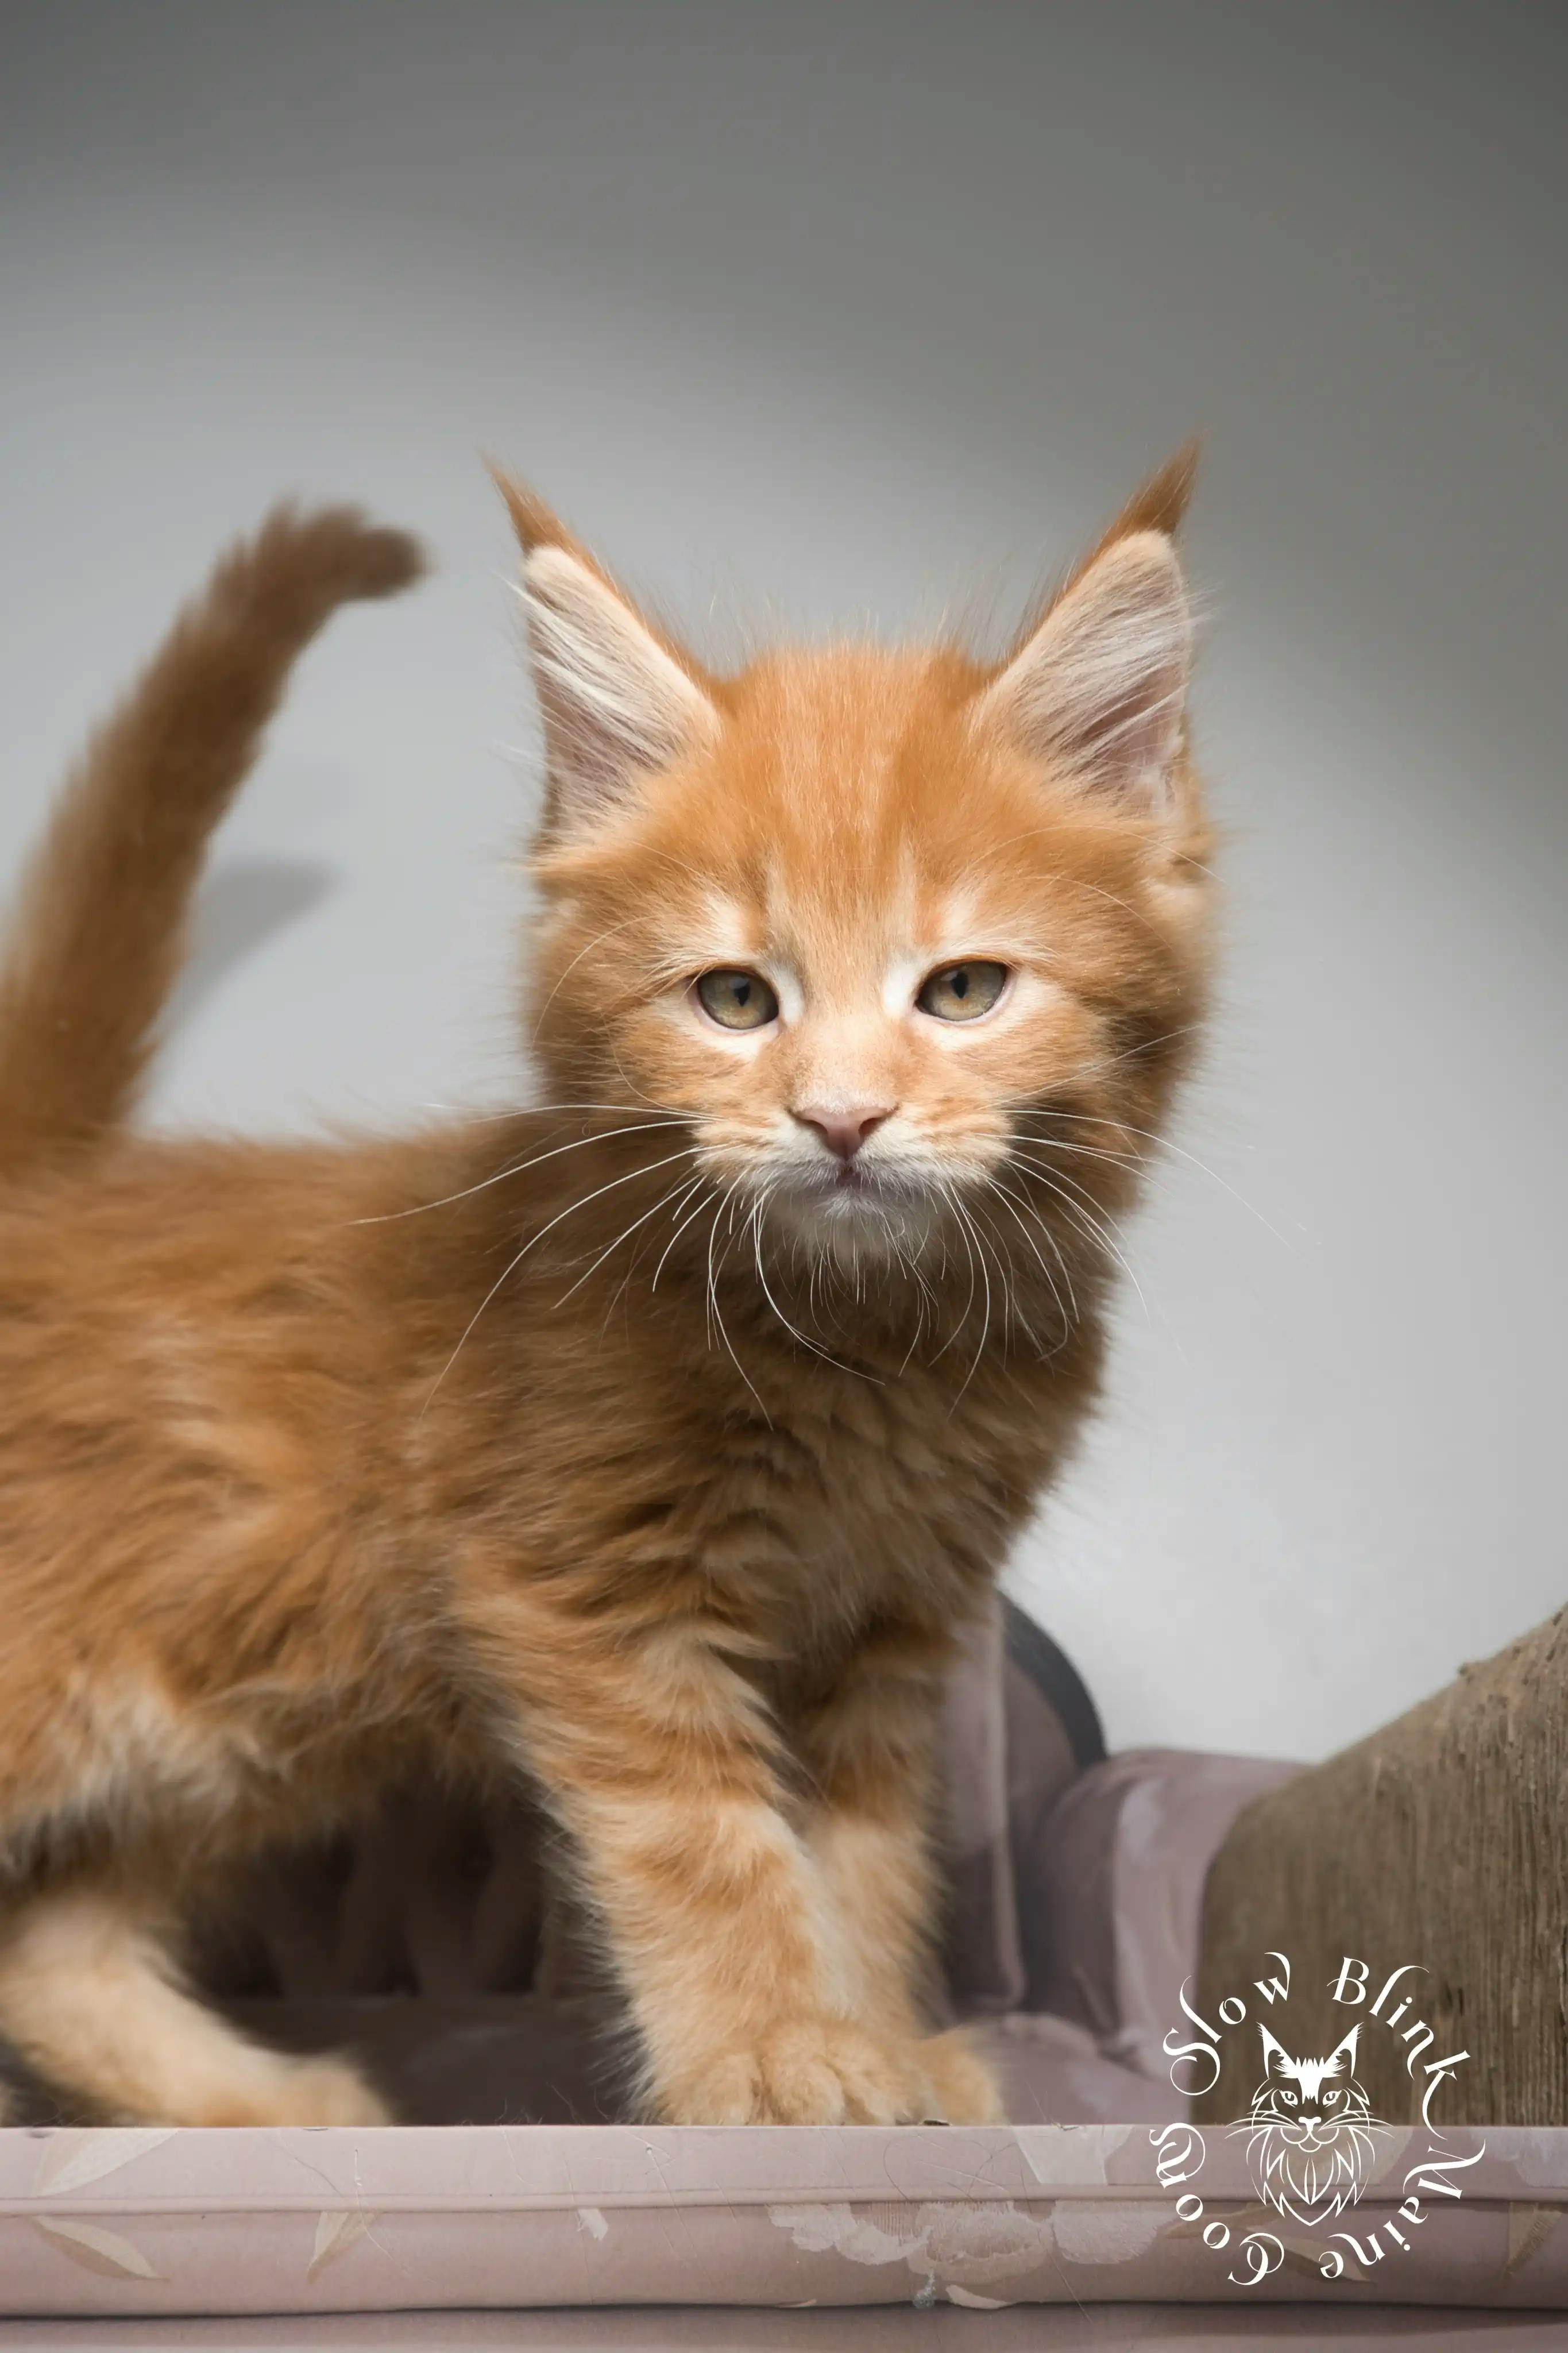 Orange (Red) Maine Coon Kittens > red orange maine coon kitten | slowblinkmainecoons | ems code d ds ds 22 1 10